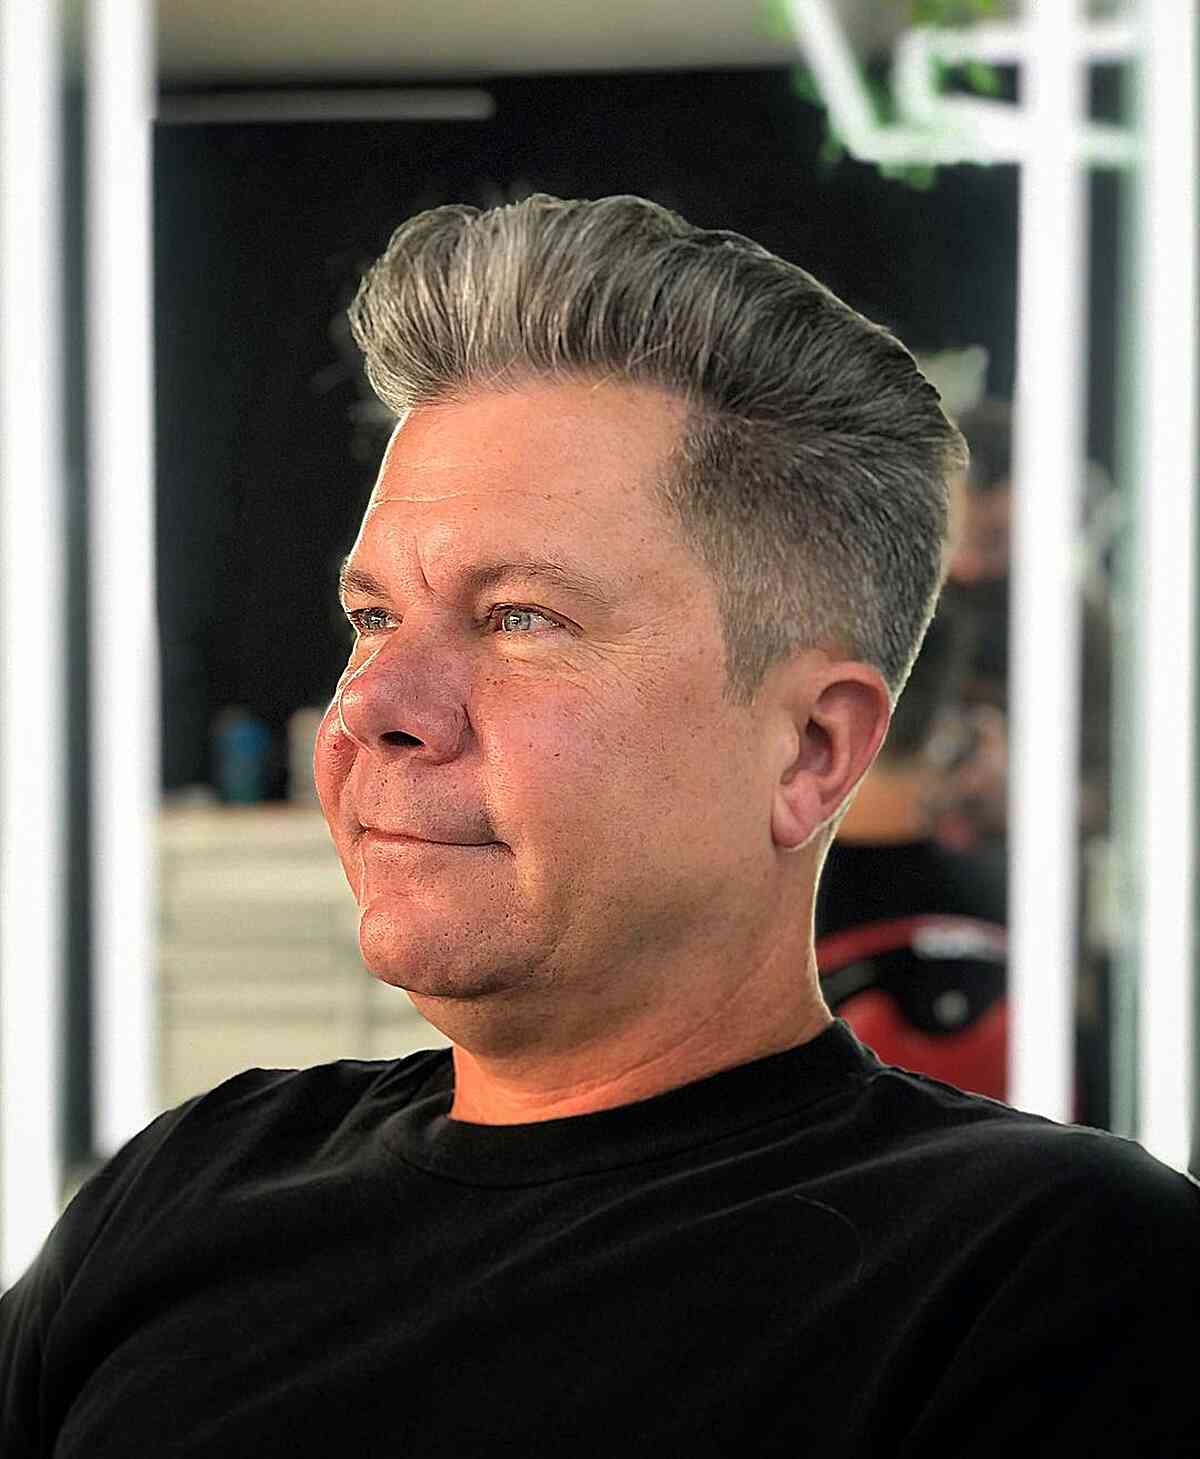 Salt and Pepper Tapered Cut for Men with thick hair